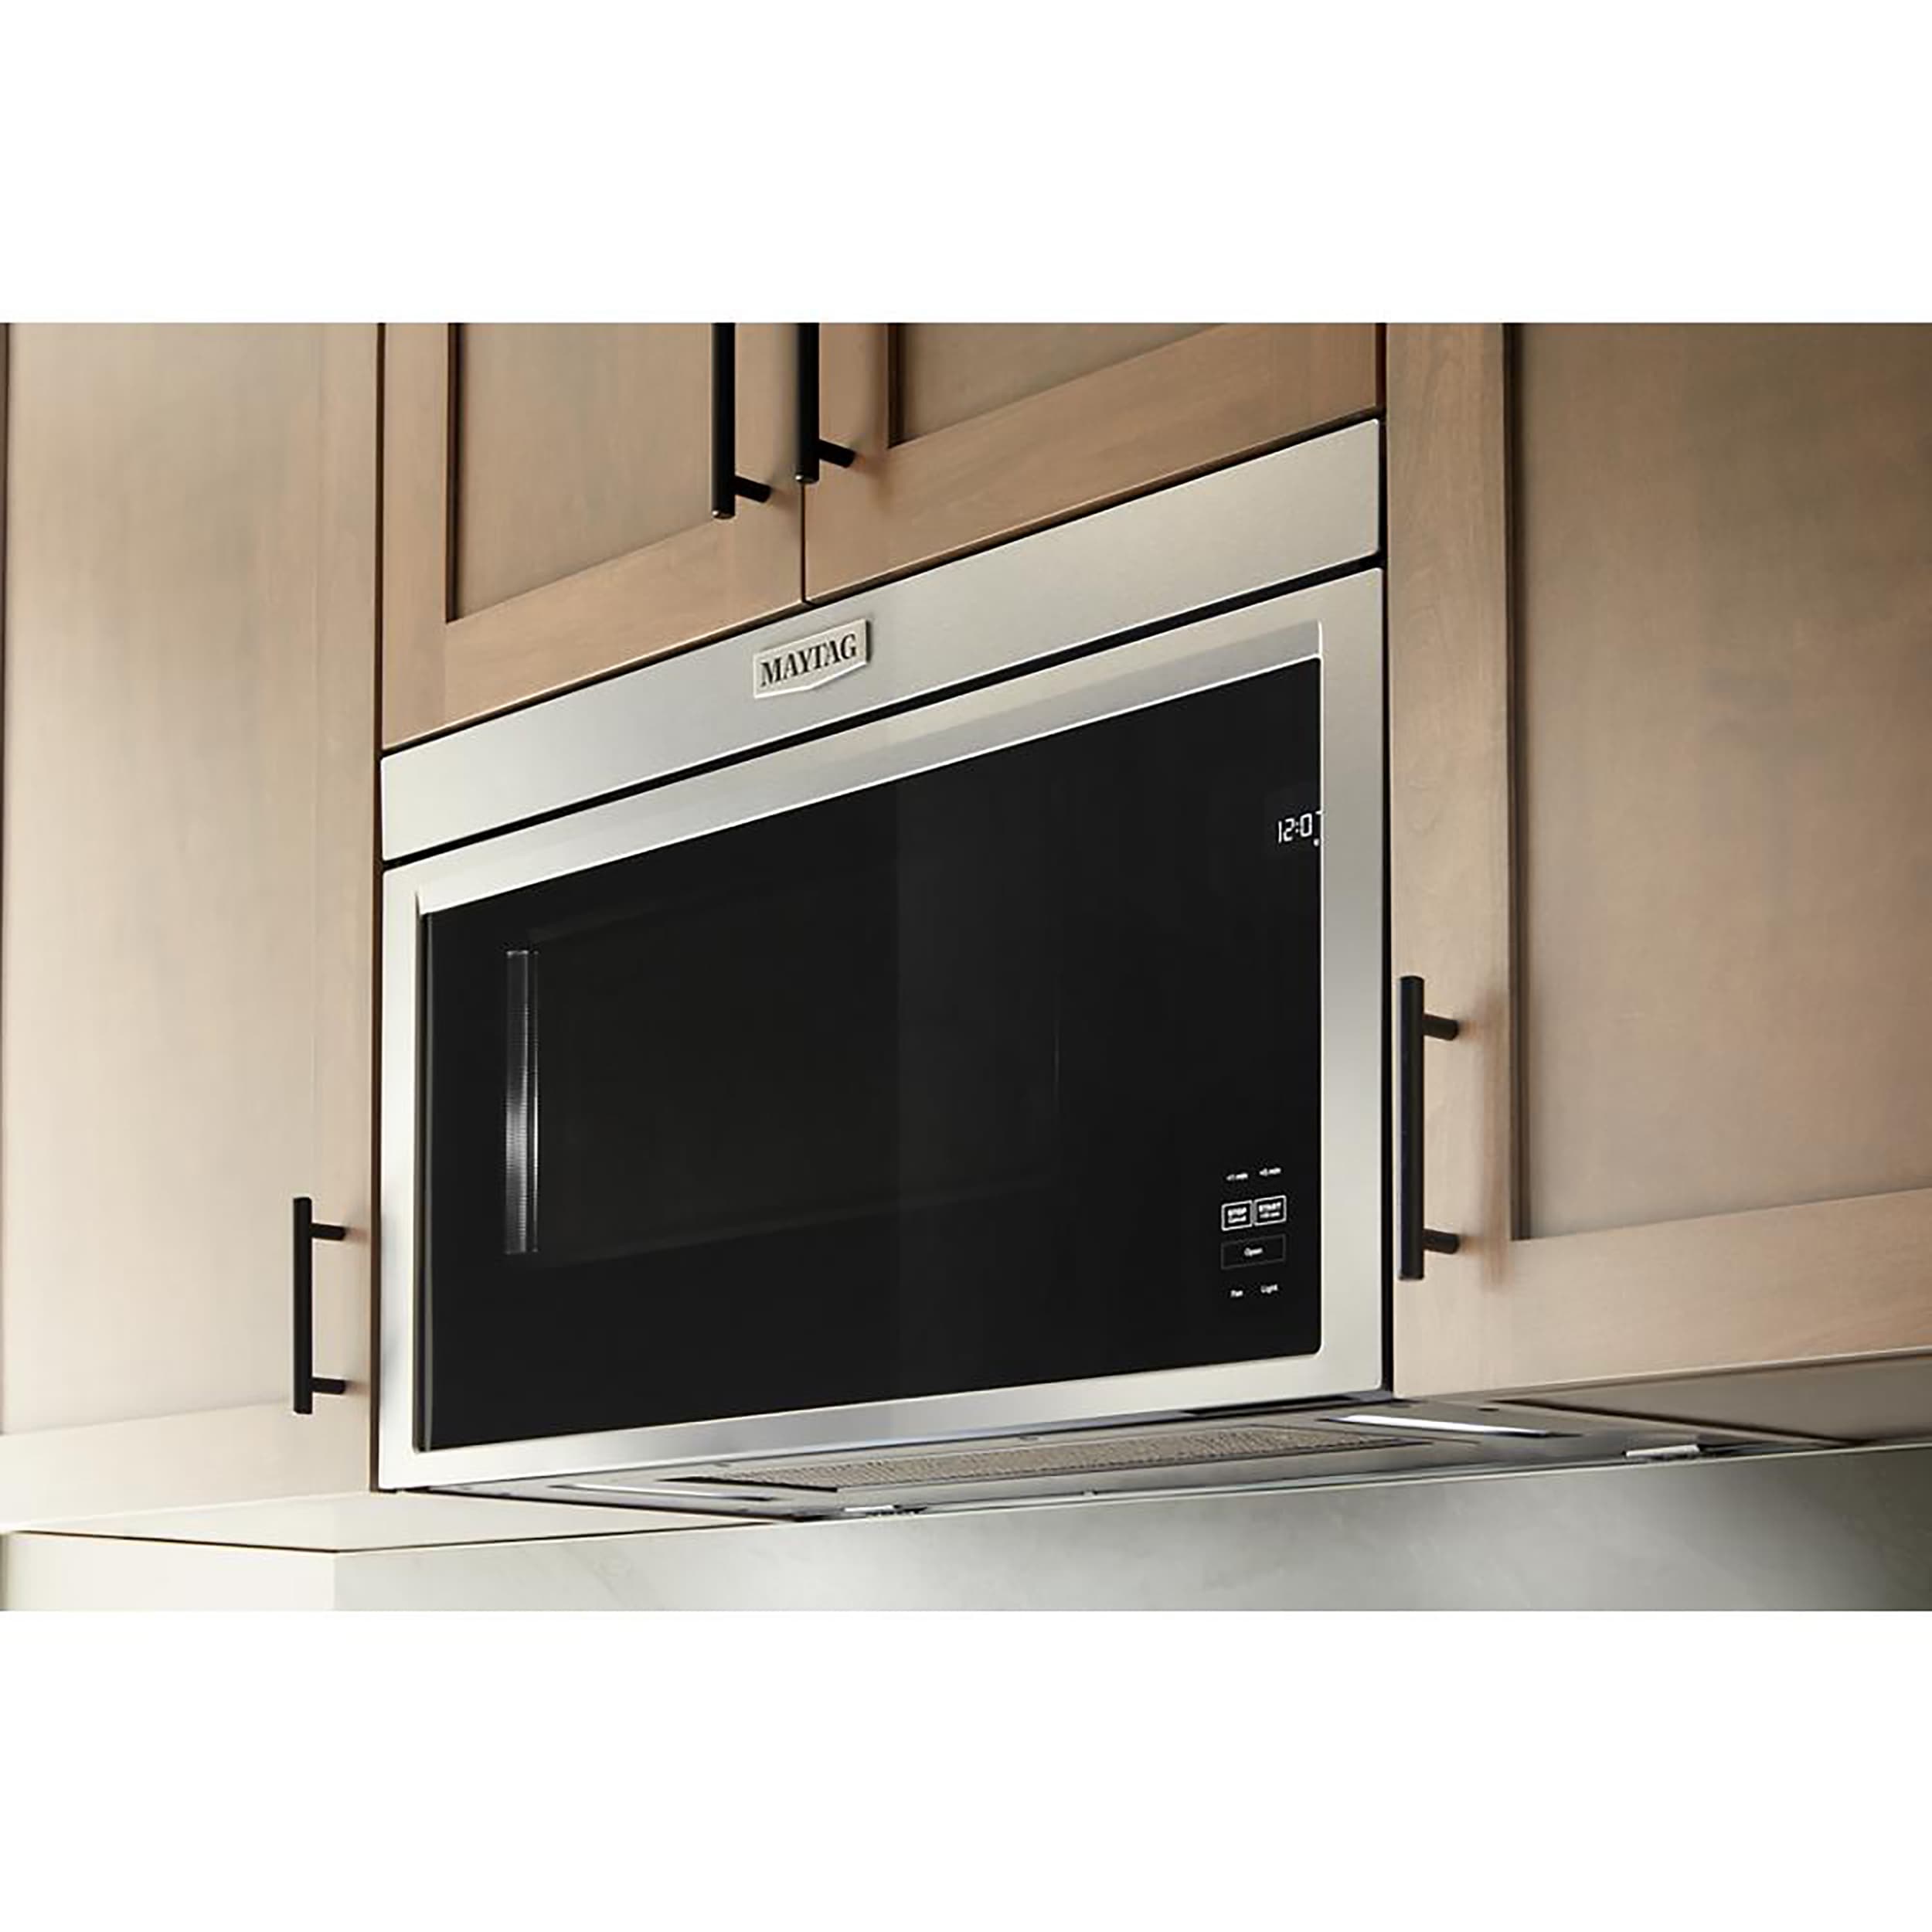 MMMF6030PB in Black by Maytag in Schenectady, NY - Over-the-Range Flush  Built-In Microwave - 1.1 Cu. Ft.